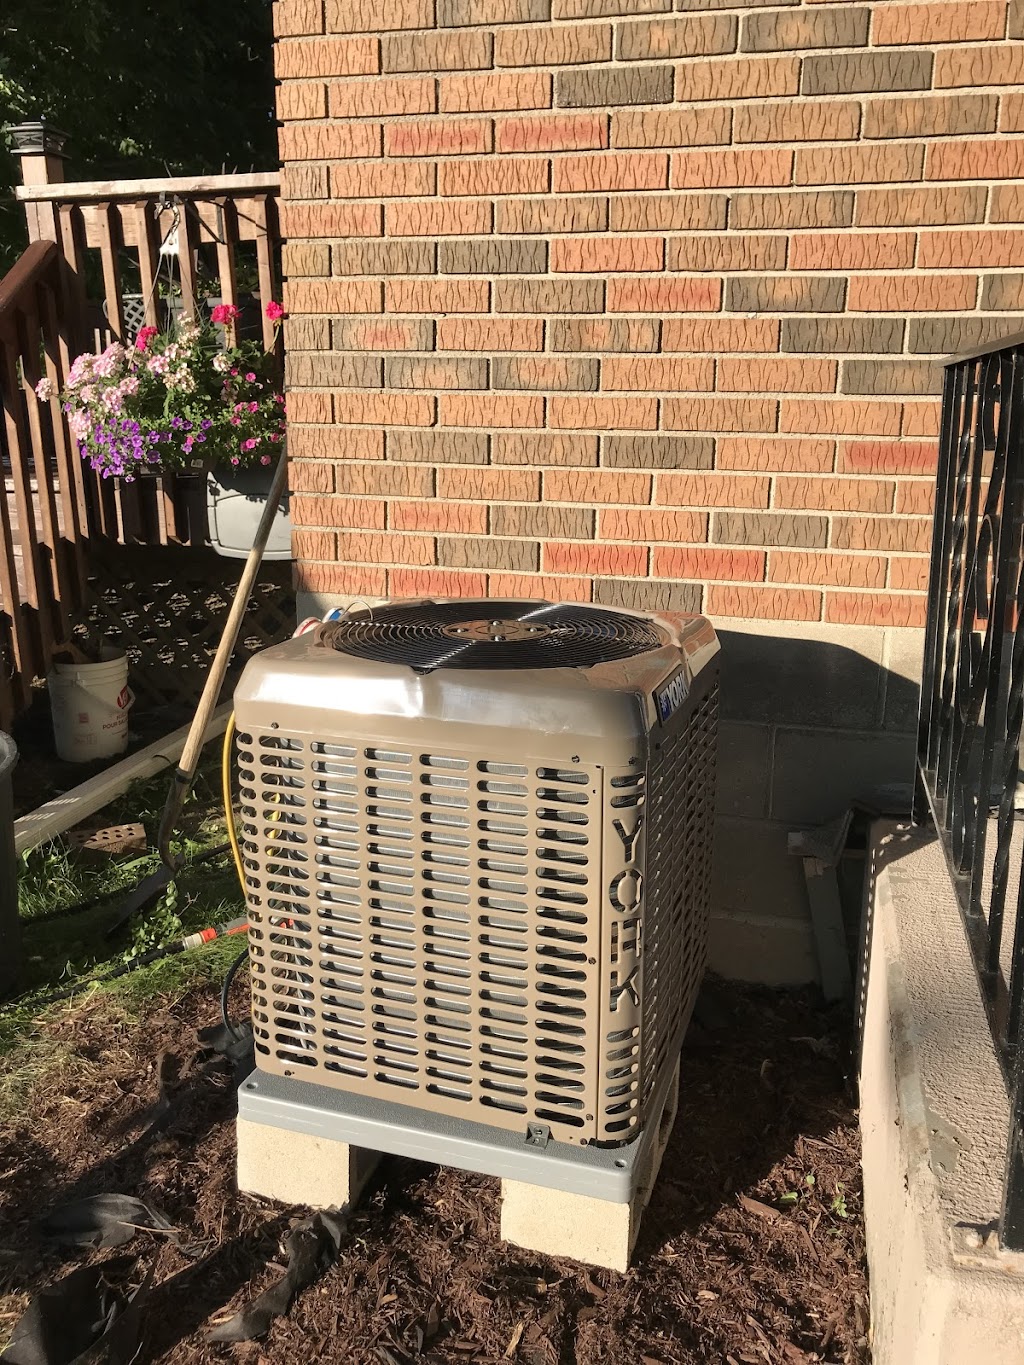 CACC - Canadian Air Conditioner Centre | point of interest | 22 Knotty Pine Trail, Thornhill, ON L3T 3W4, Canada | 4164510701 OR +1 416-451-0701